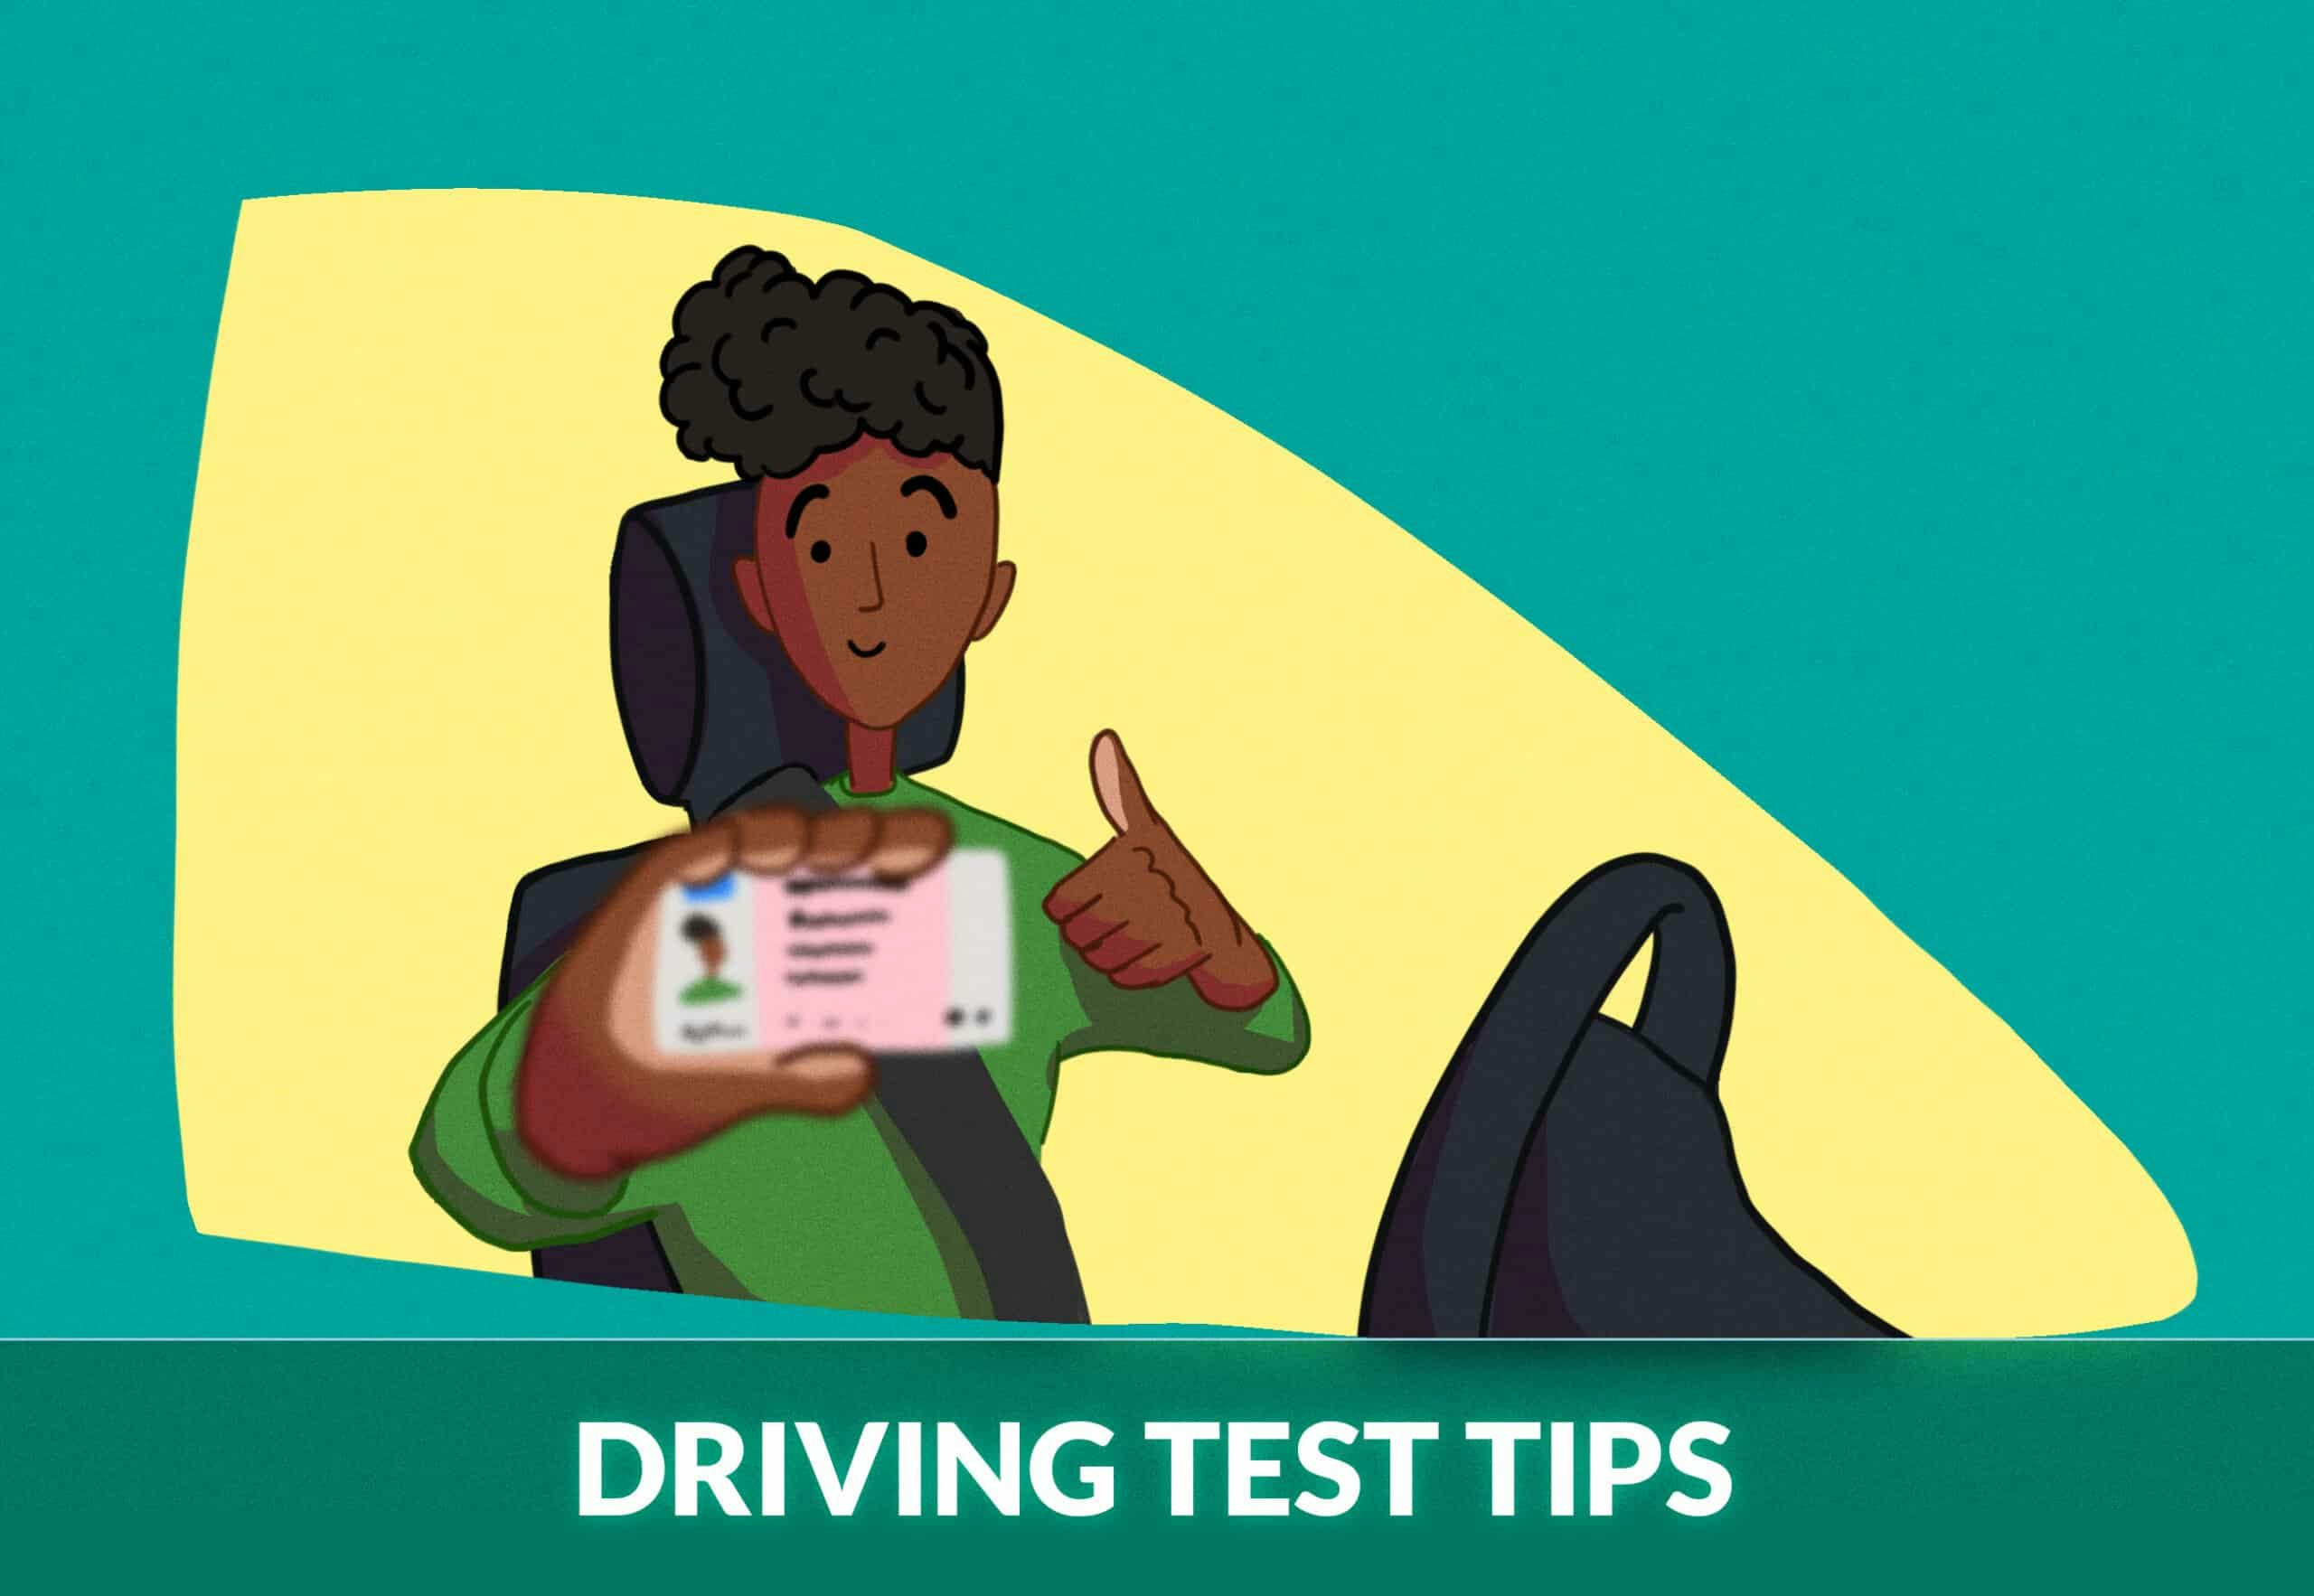 DRIVING TEST TIPS